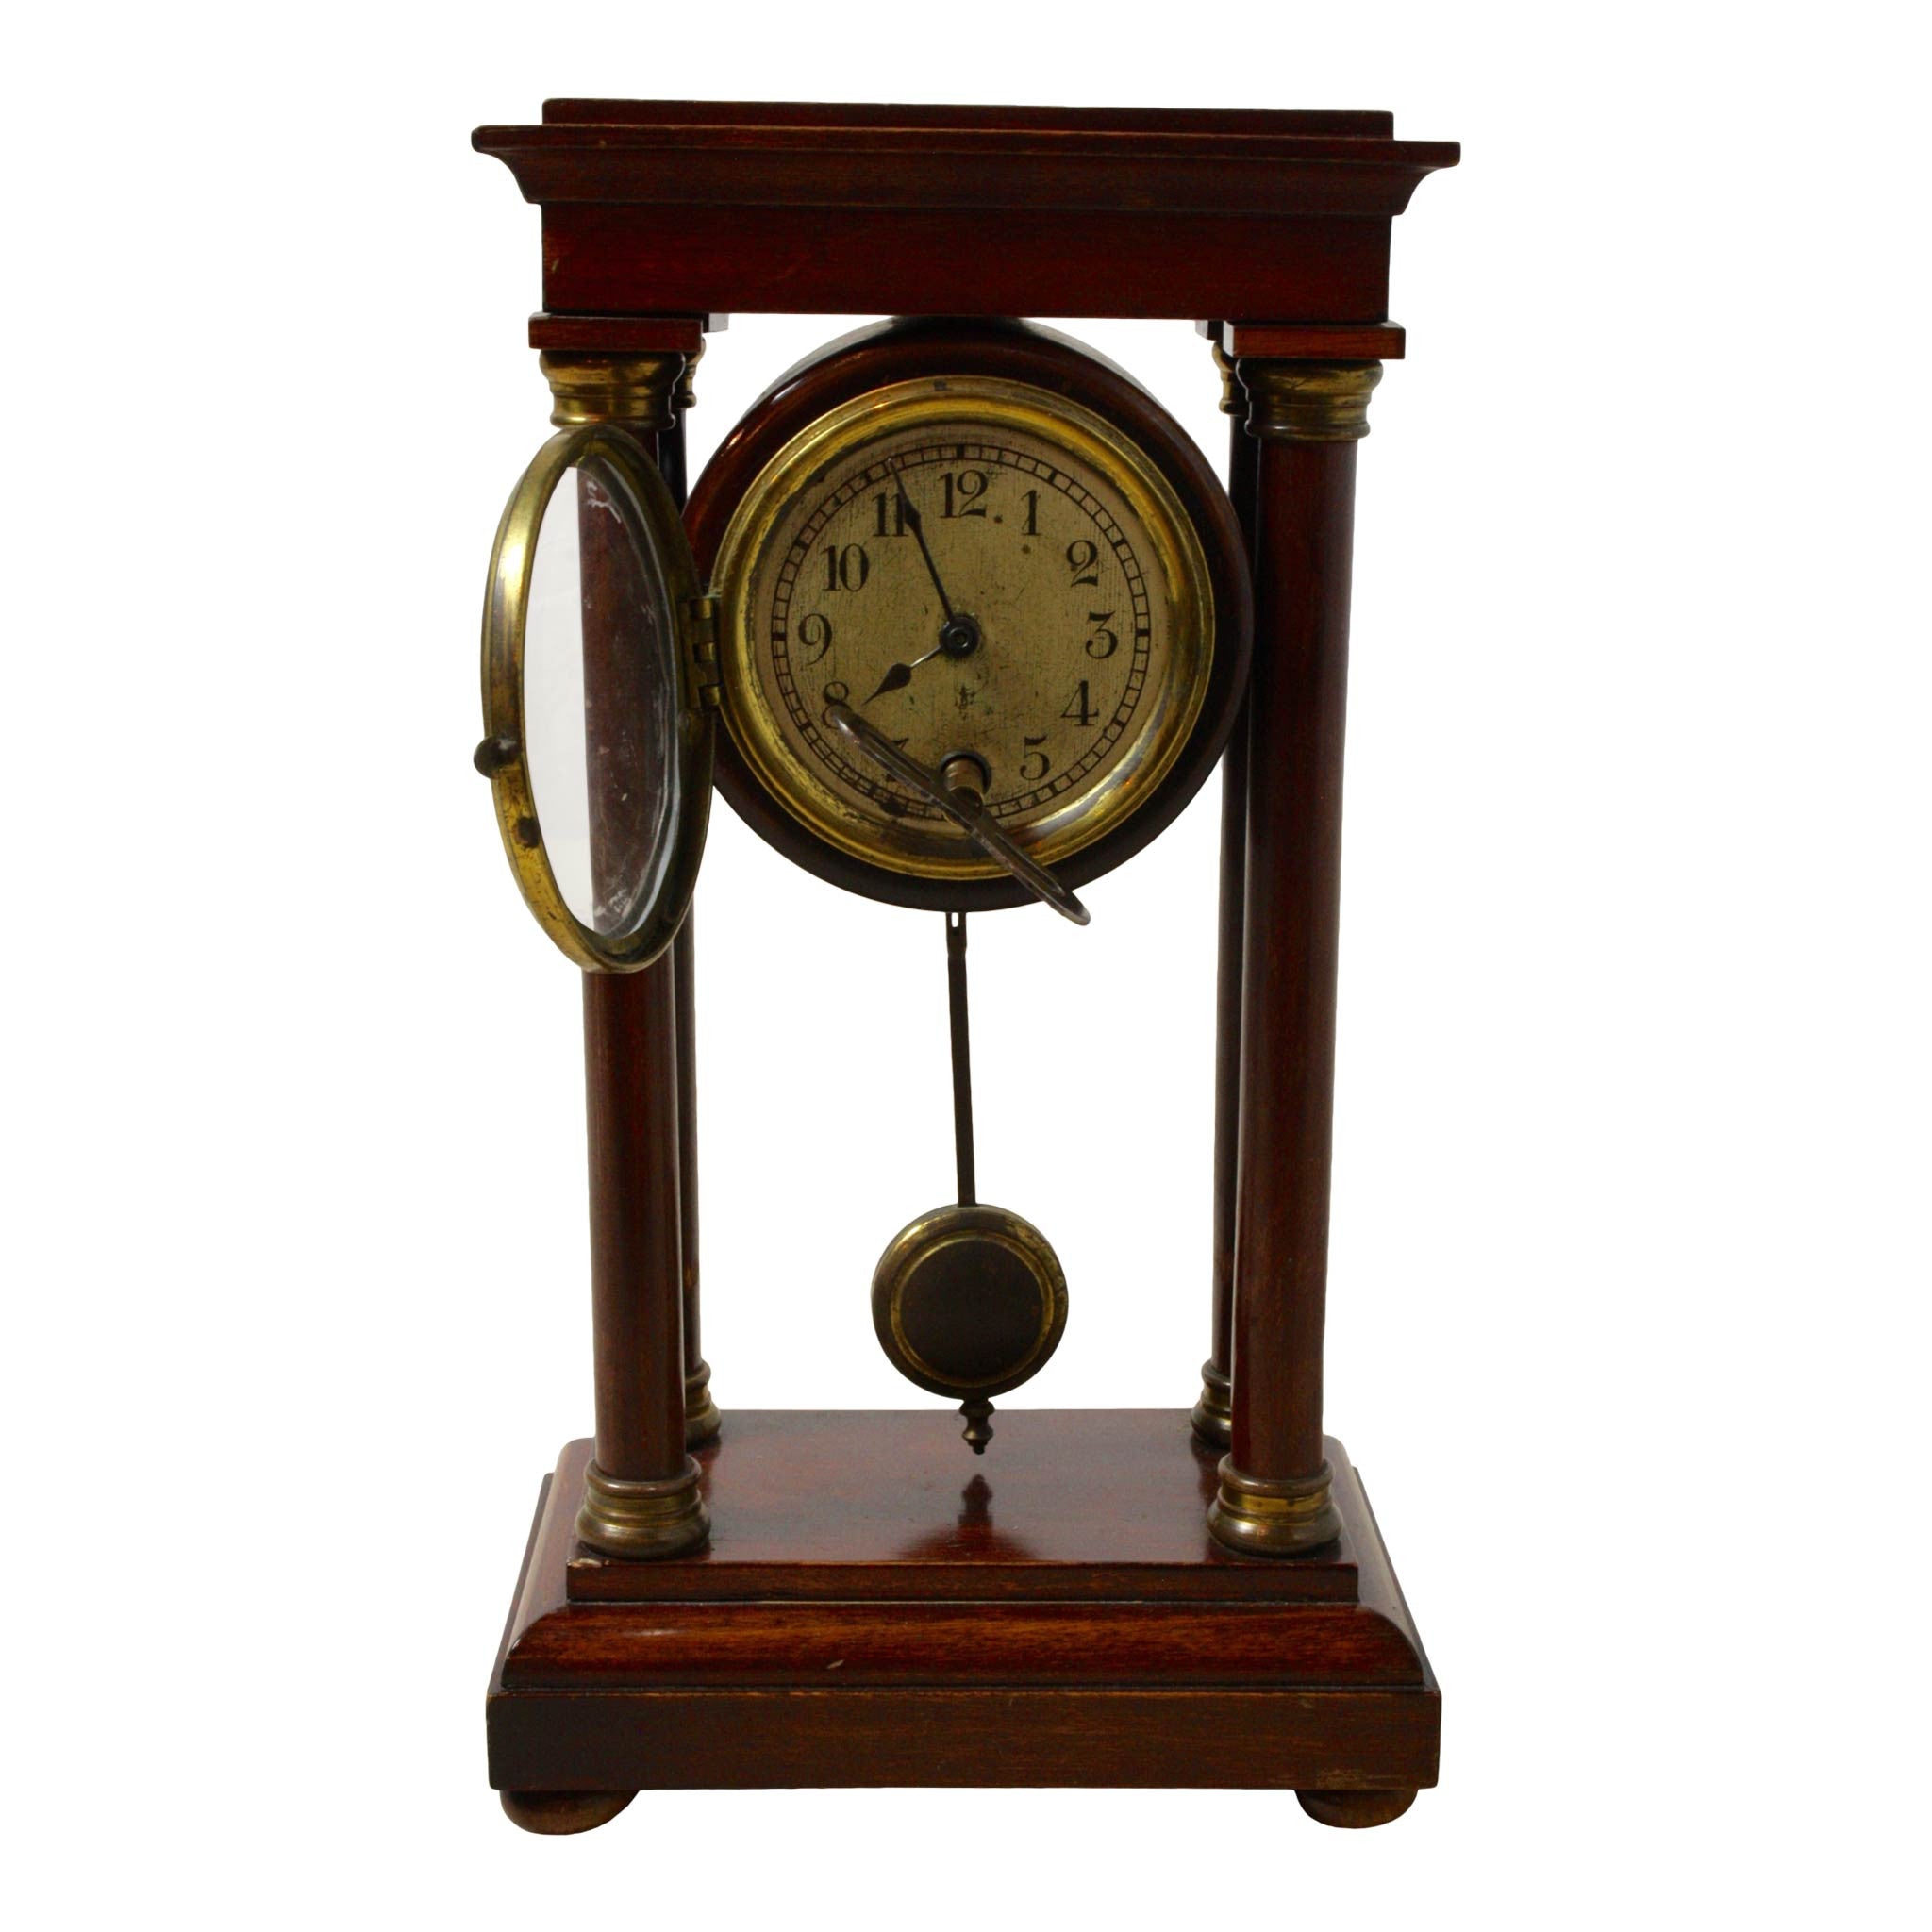 Small Table Clock with Key